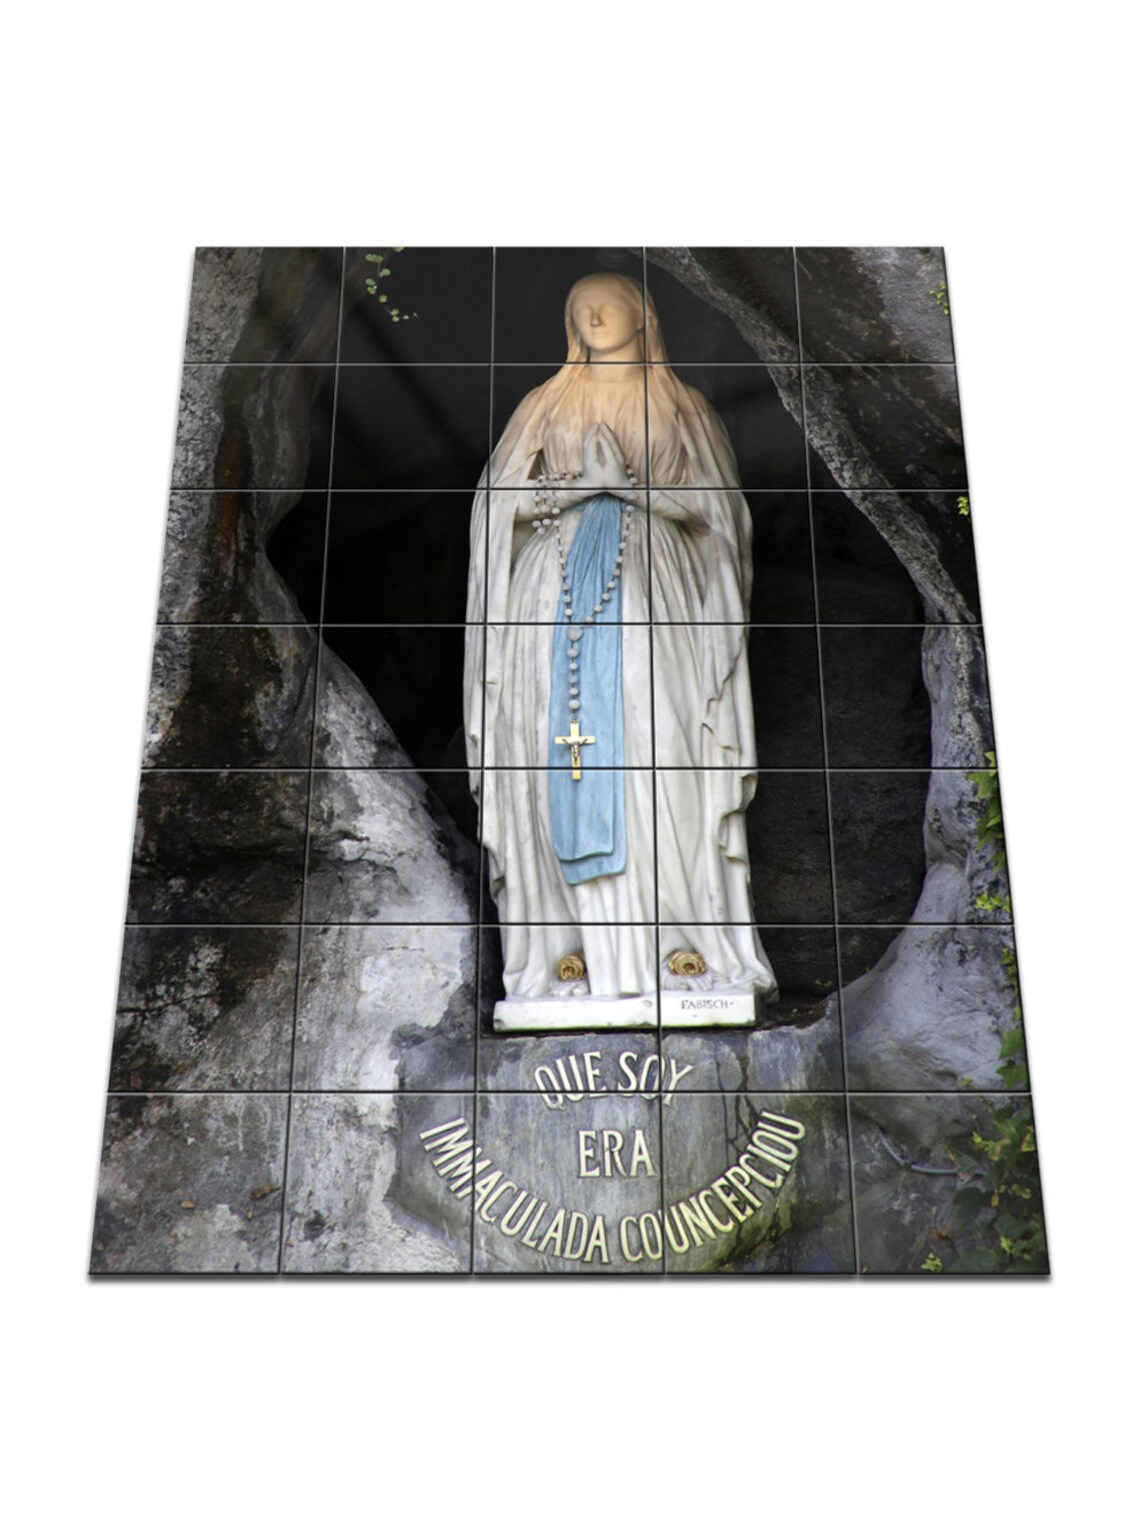 Our Lady of Lourdes  Tile Mural  Catholic Wall Art  Marian image 0